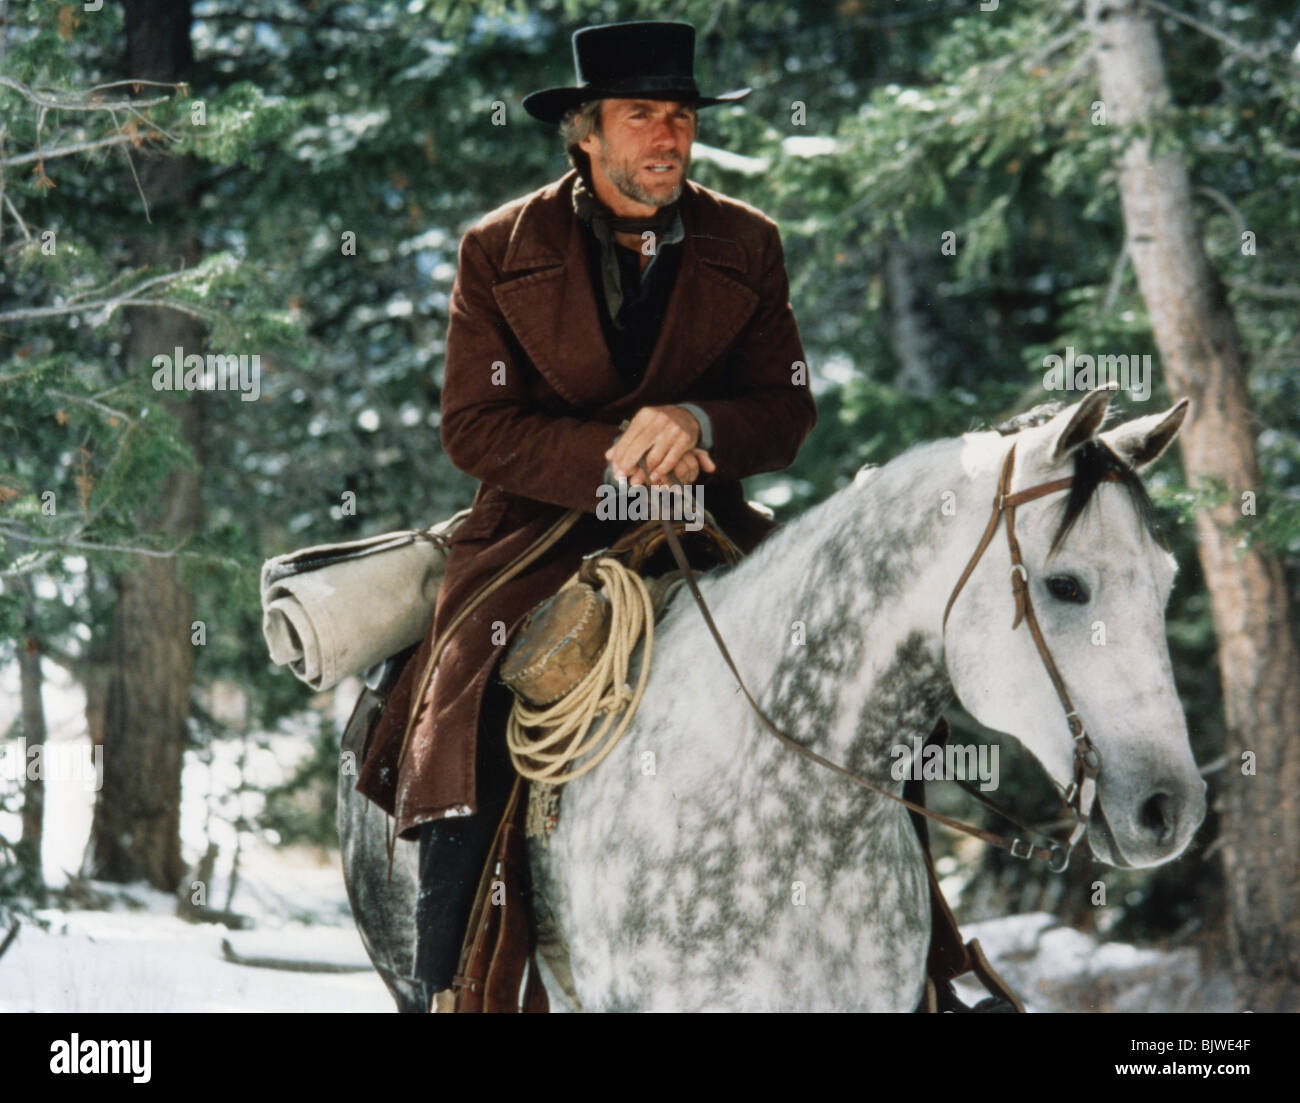 PALE RIDER - 1985 Warner/Malpaso film with Clint Eastwood Stock Photo